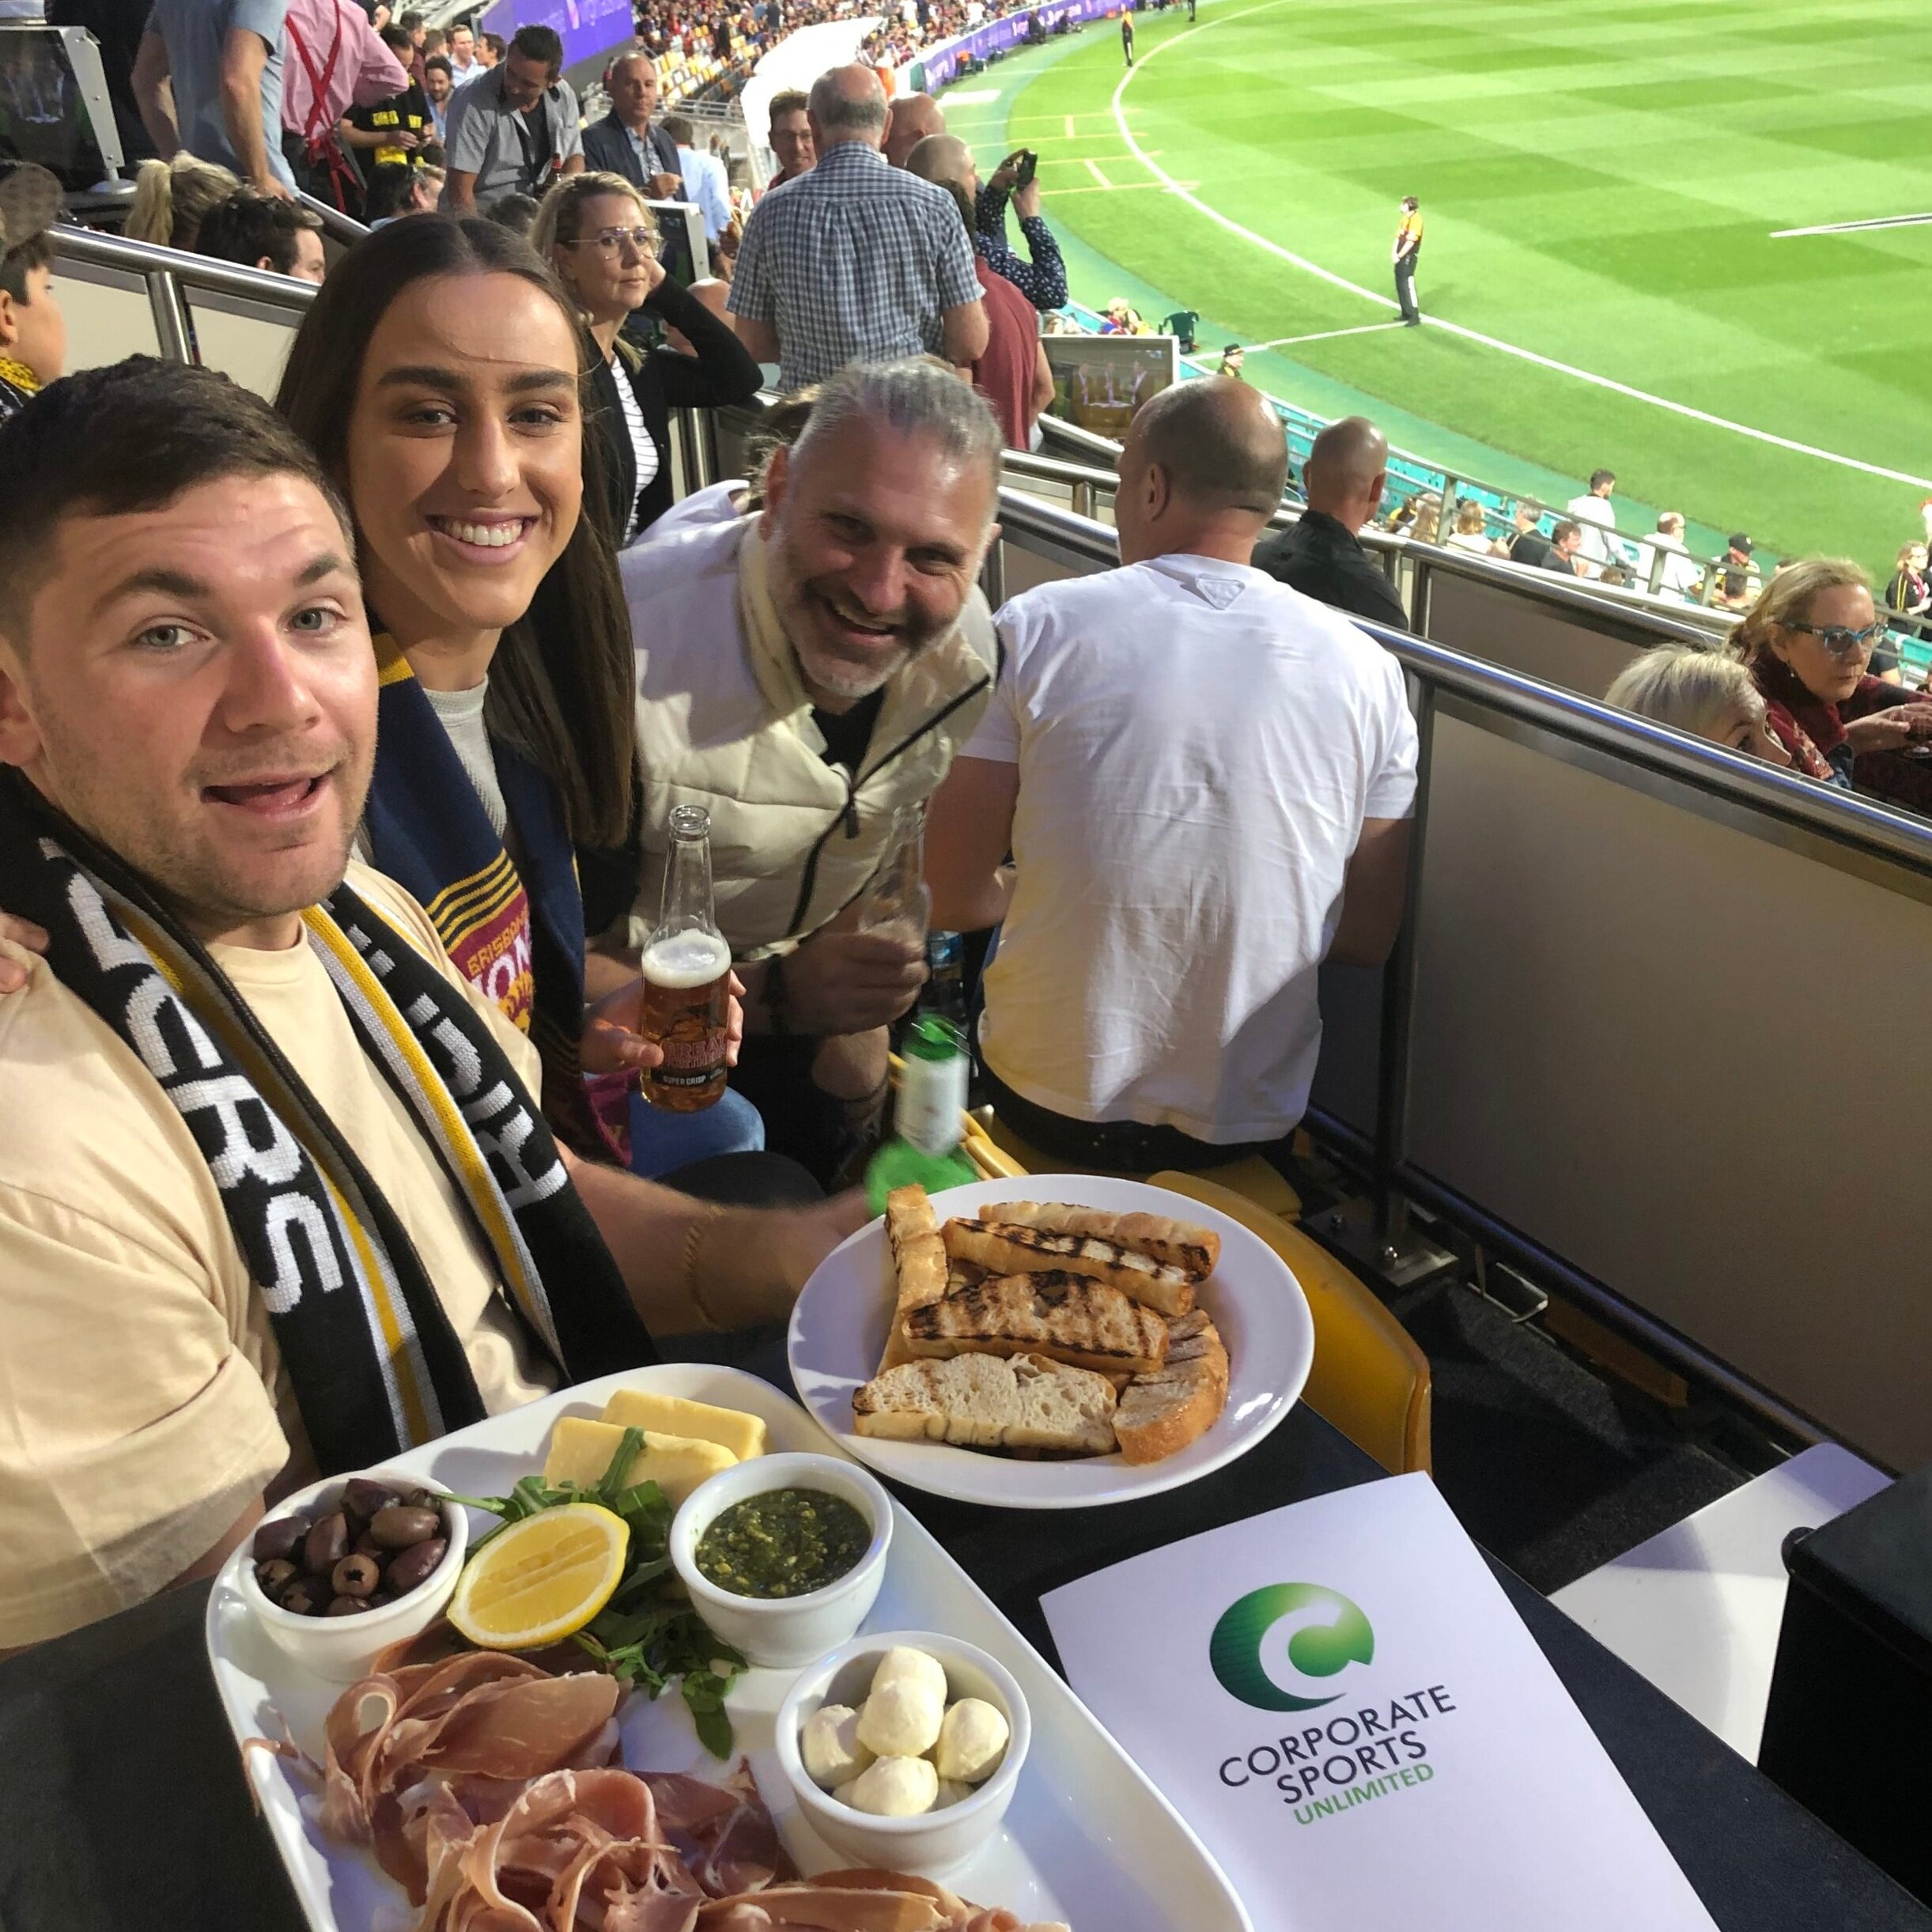 The Gabba — Corporate Sports Unlimited